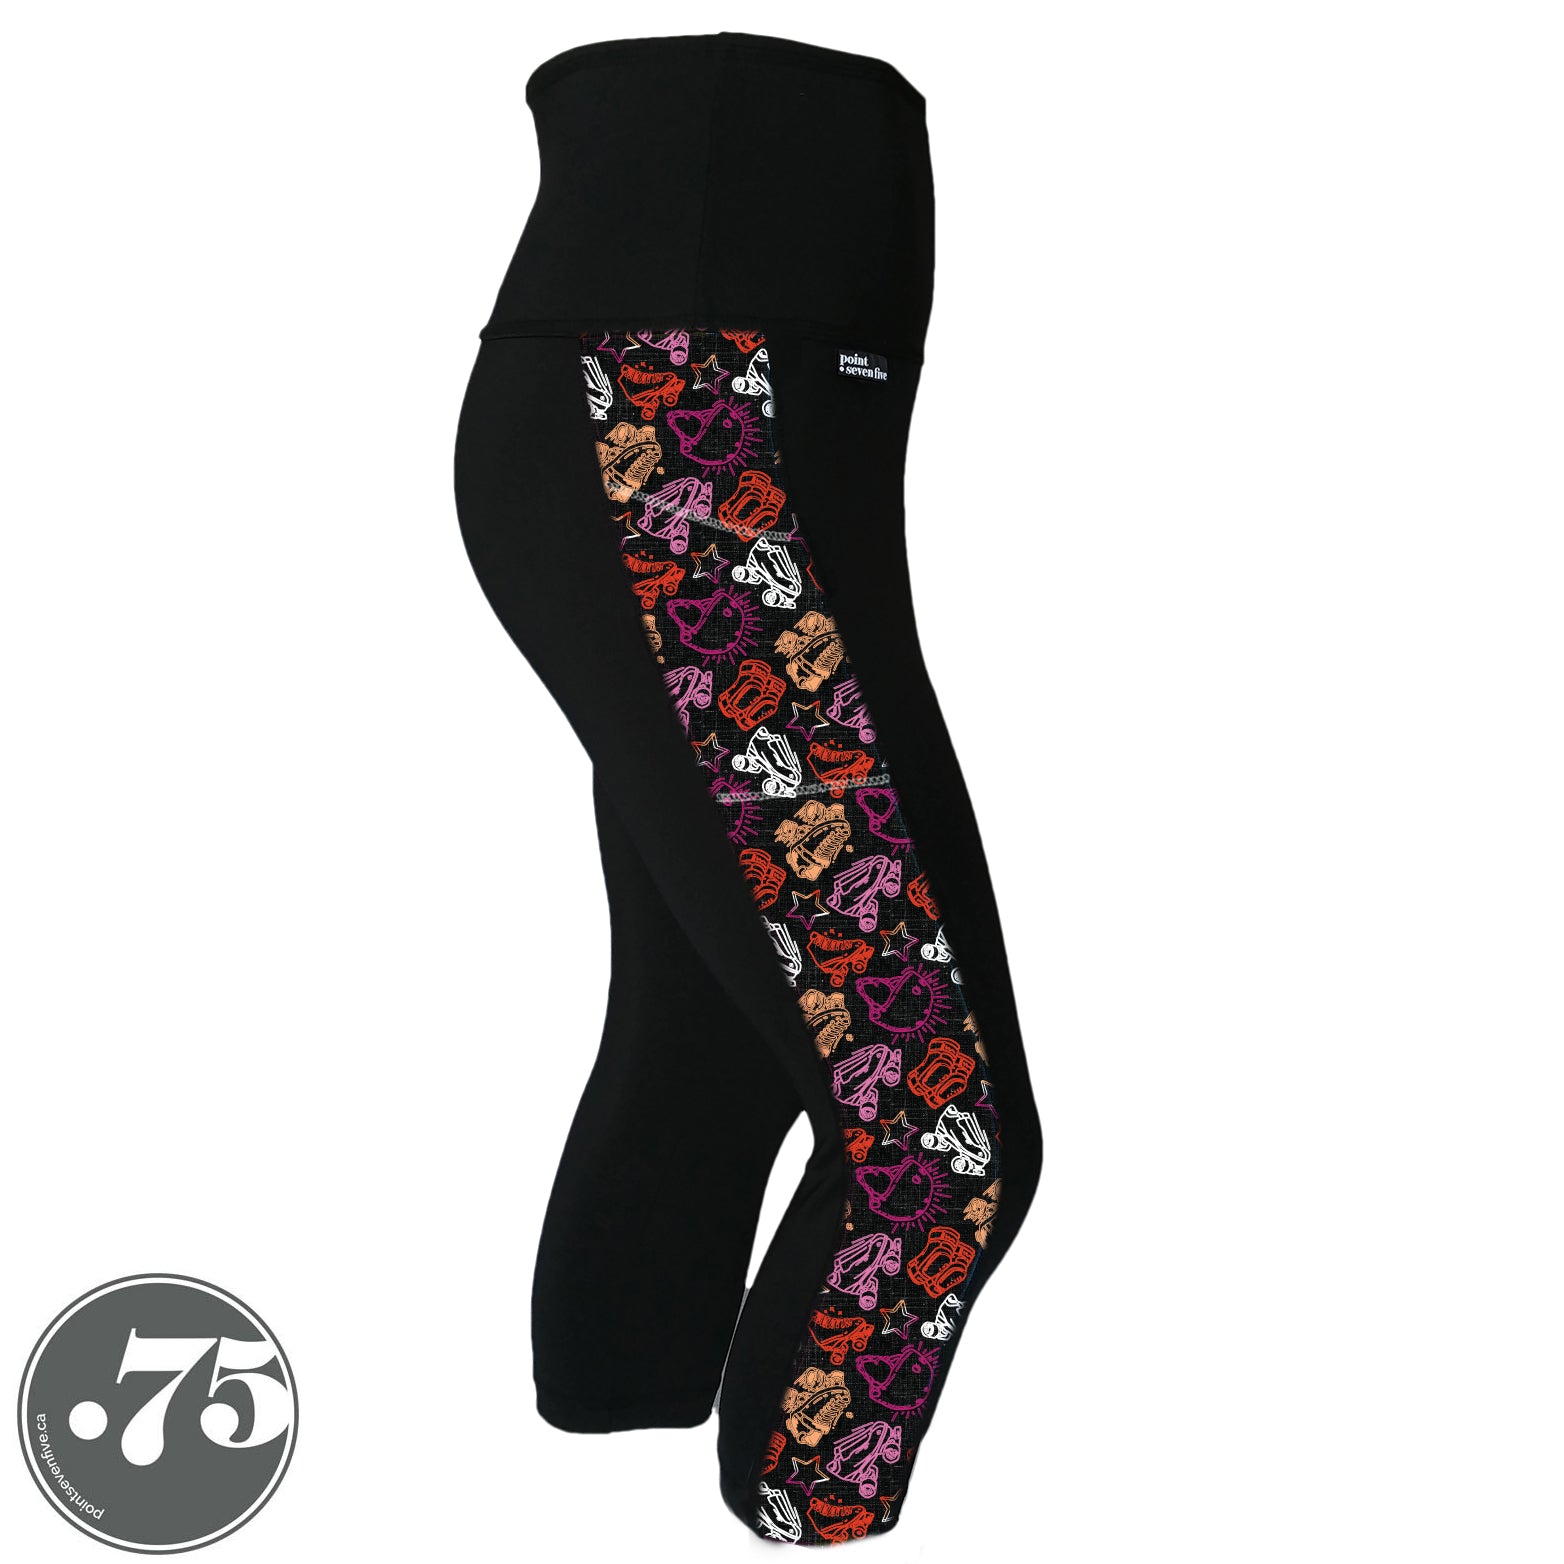 A pair of black spandex capri leggings on a mannequin, the leggings have a 3.5” wide stripe down the side that has a printed fabric with rollerskates, helmets, stars & knee pads. The graphics are in the colours of the Lesbian Pride Flag Colours orange, light orange, white, light pink and dark pink.